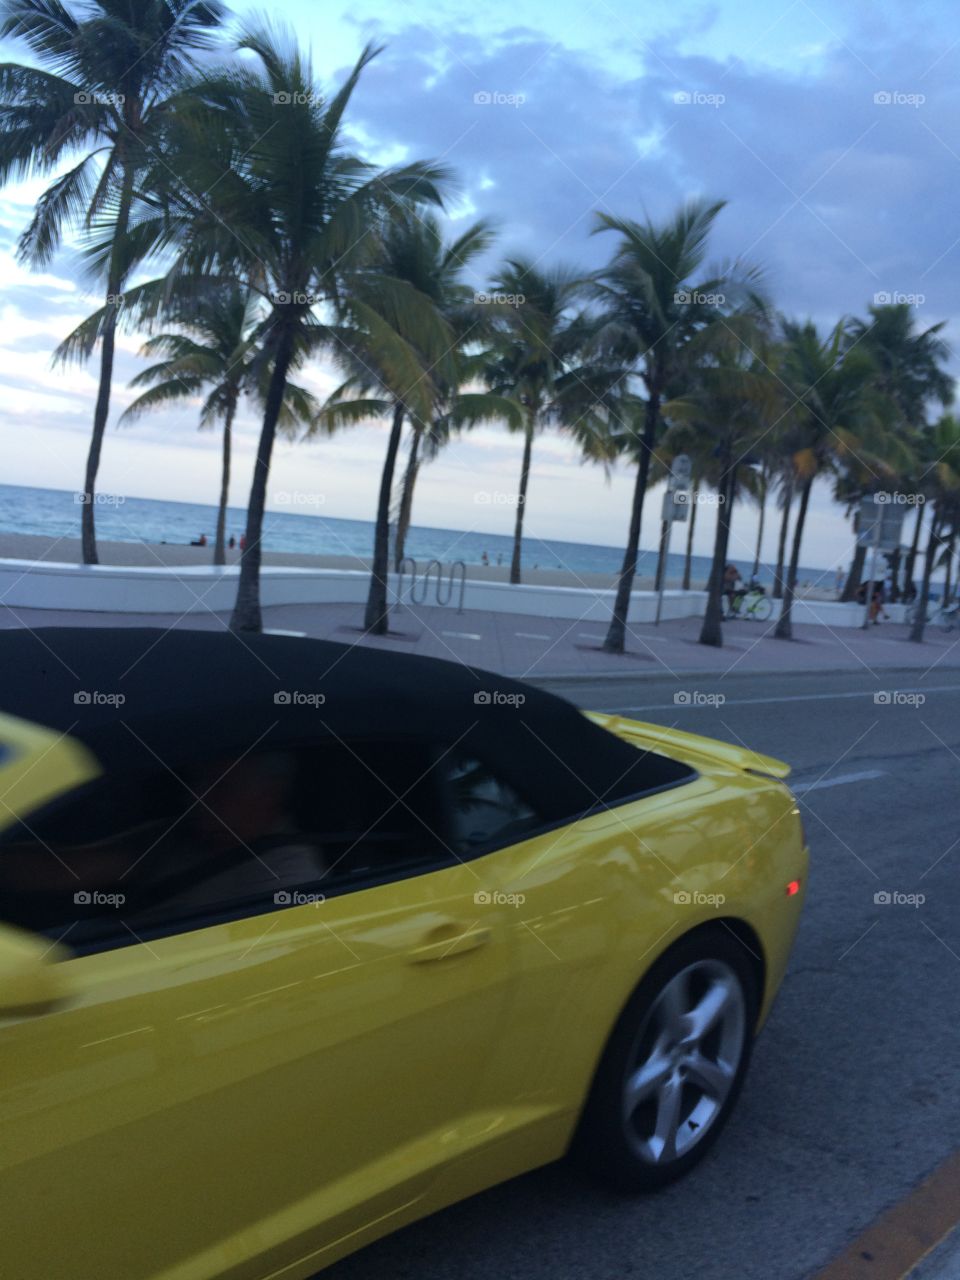 Hot cars and beachfront . Picking best in class 